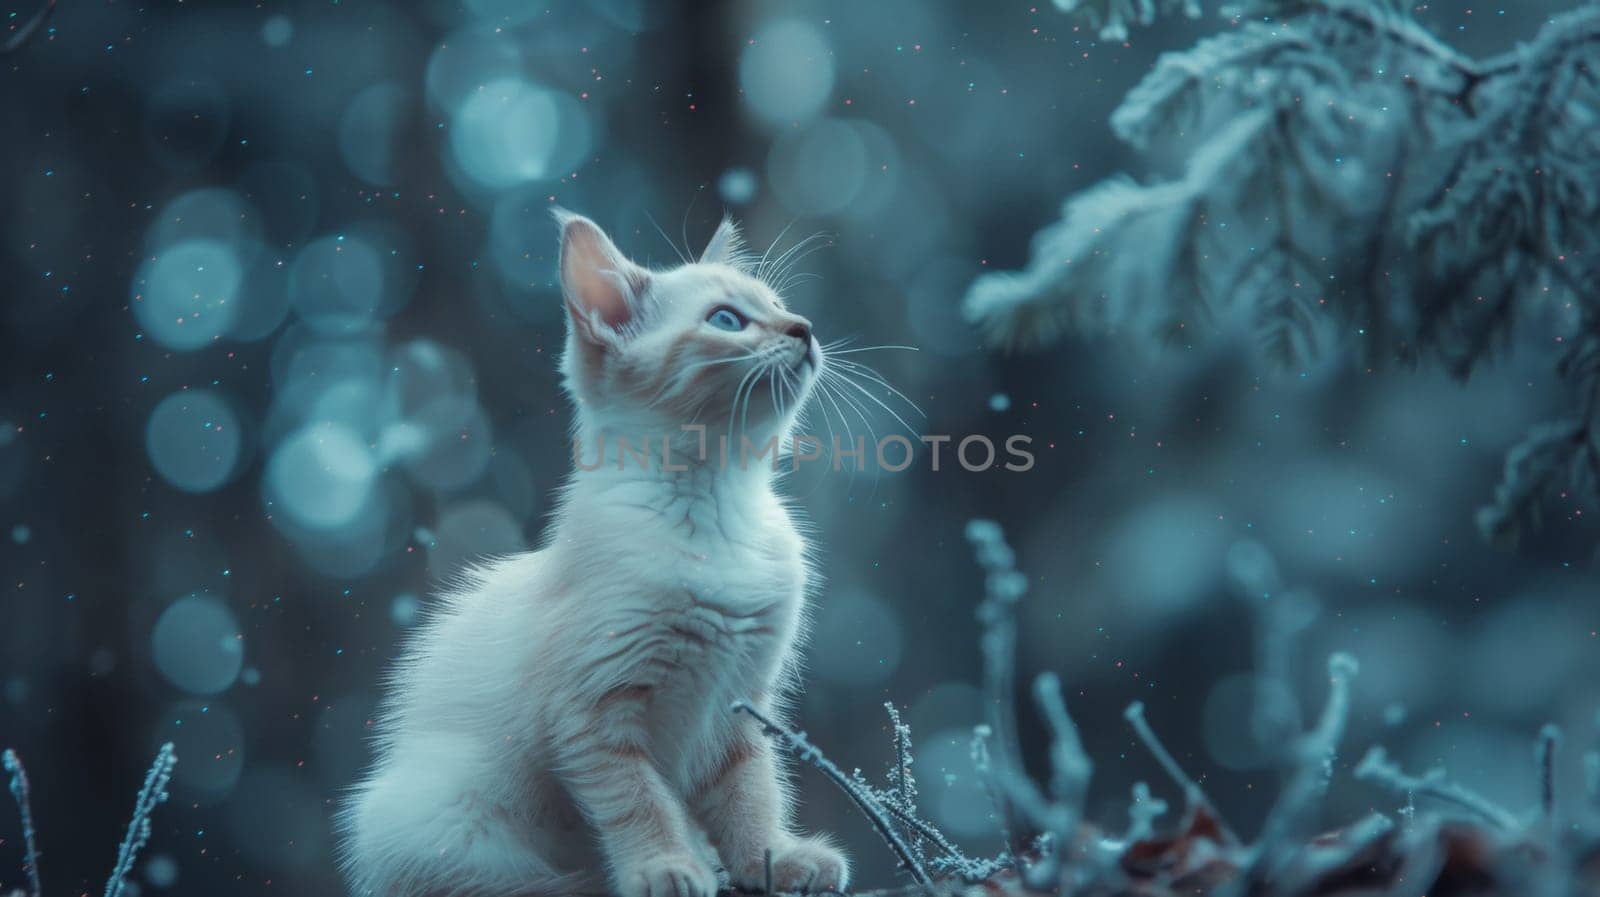 A white kitten sitting on a tree branch looking up